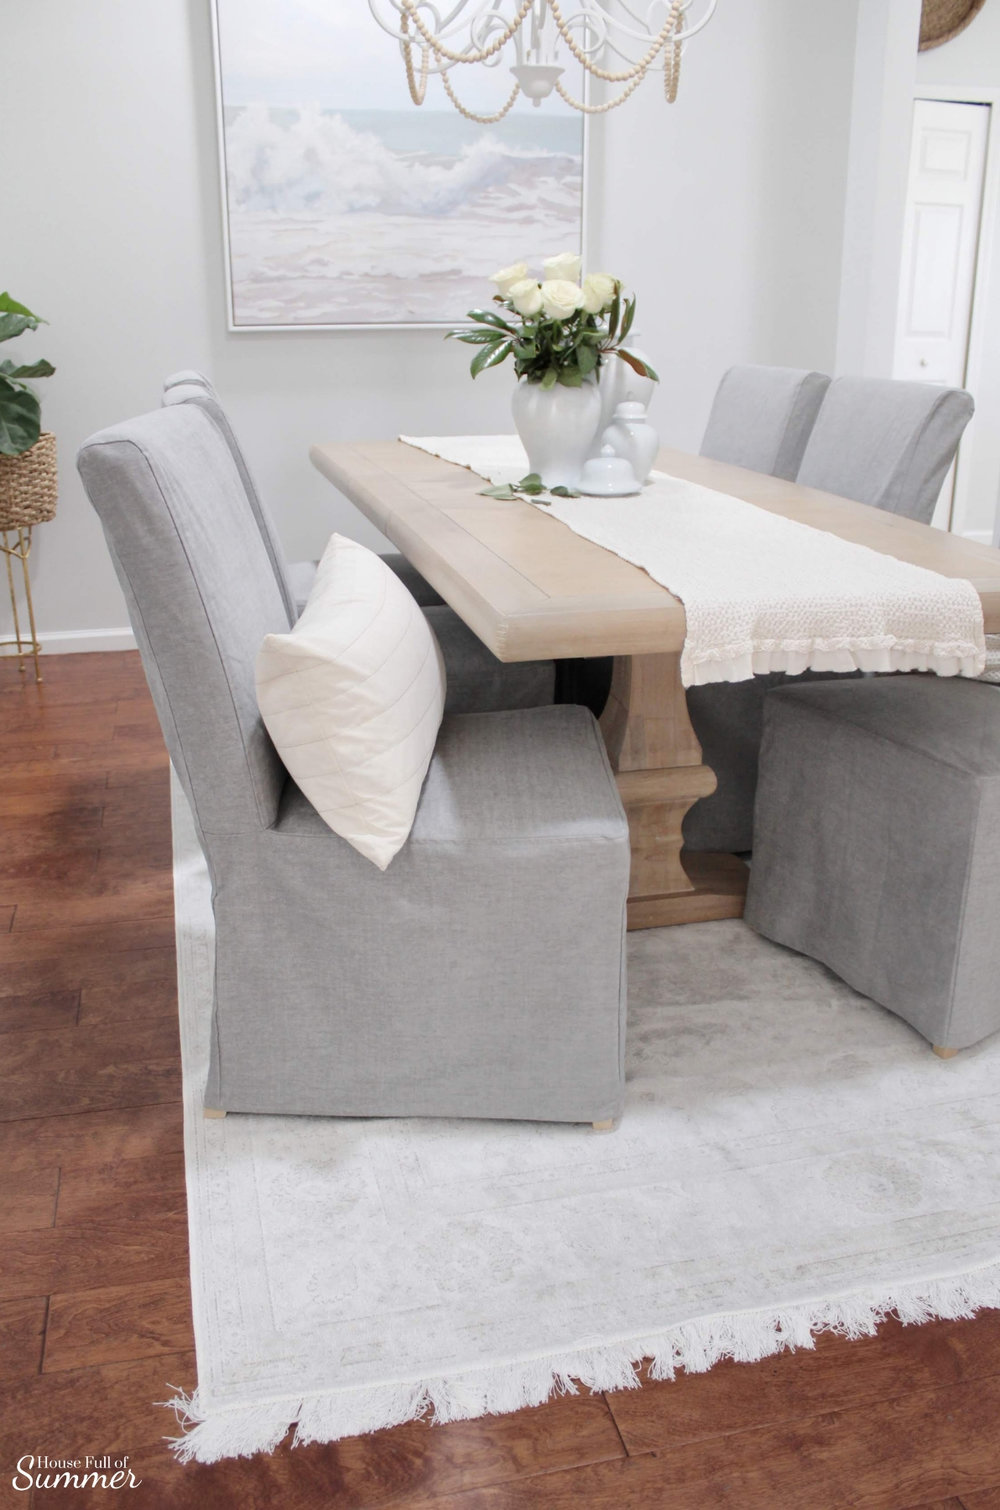 5 Items You D Never Guess I Found On, Craigslist Dining Room Table